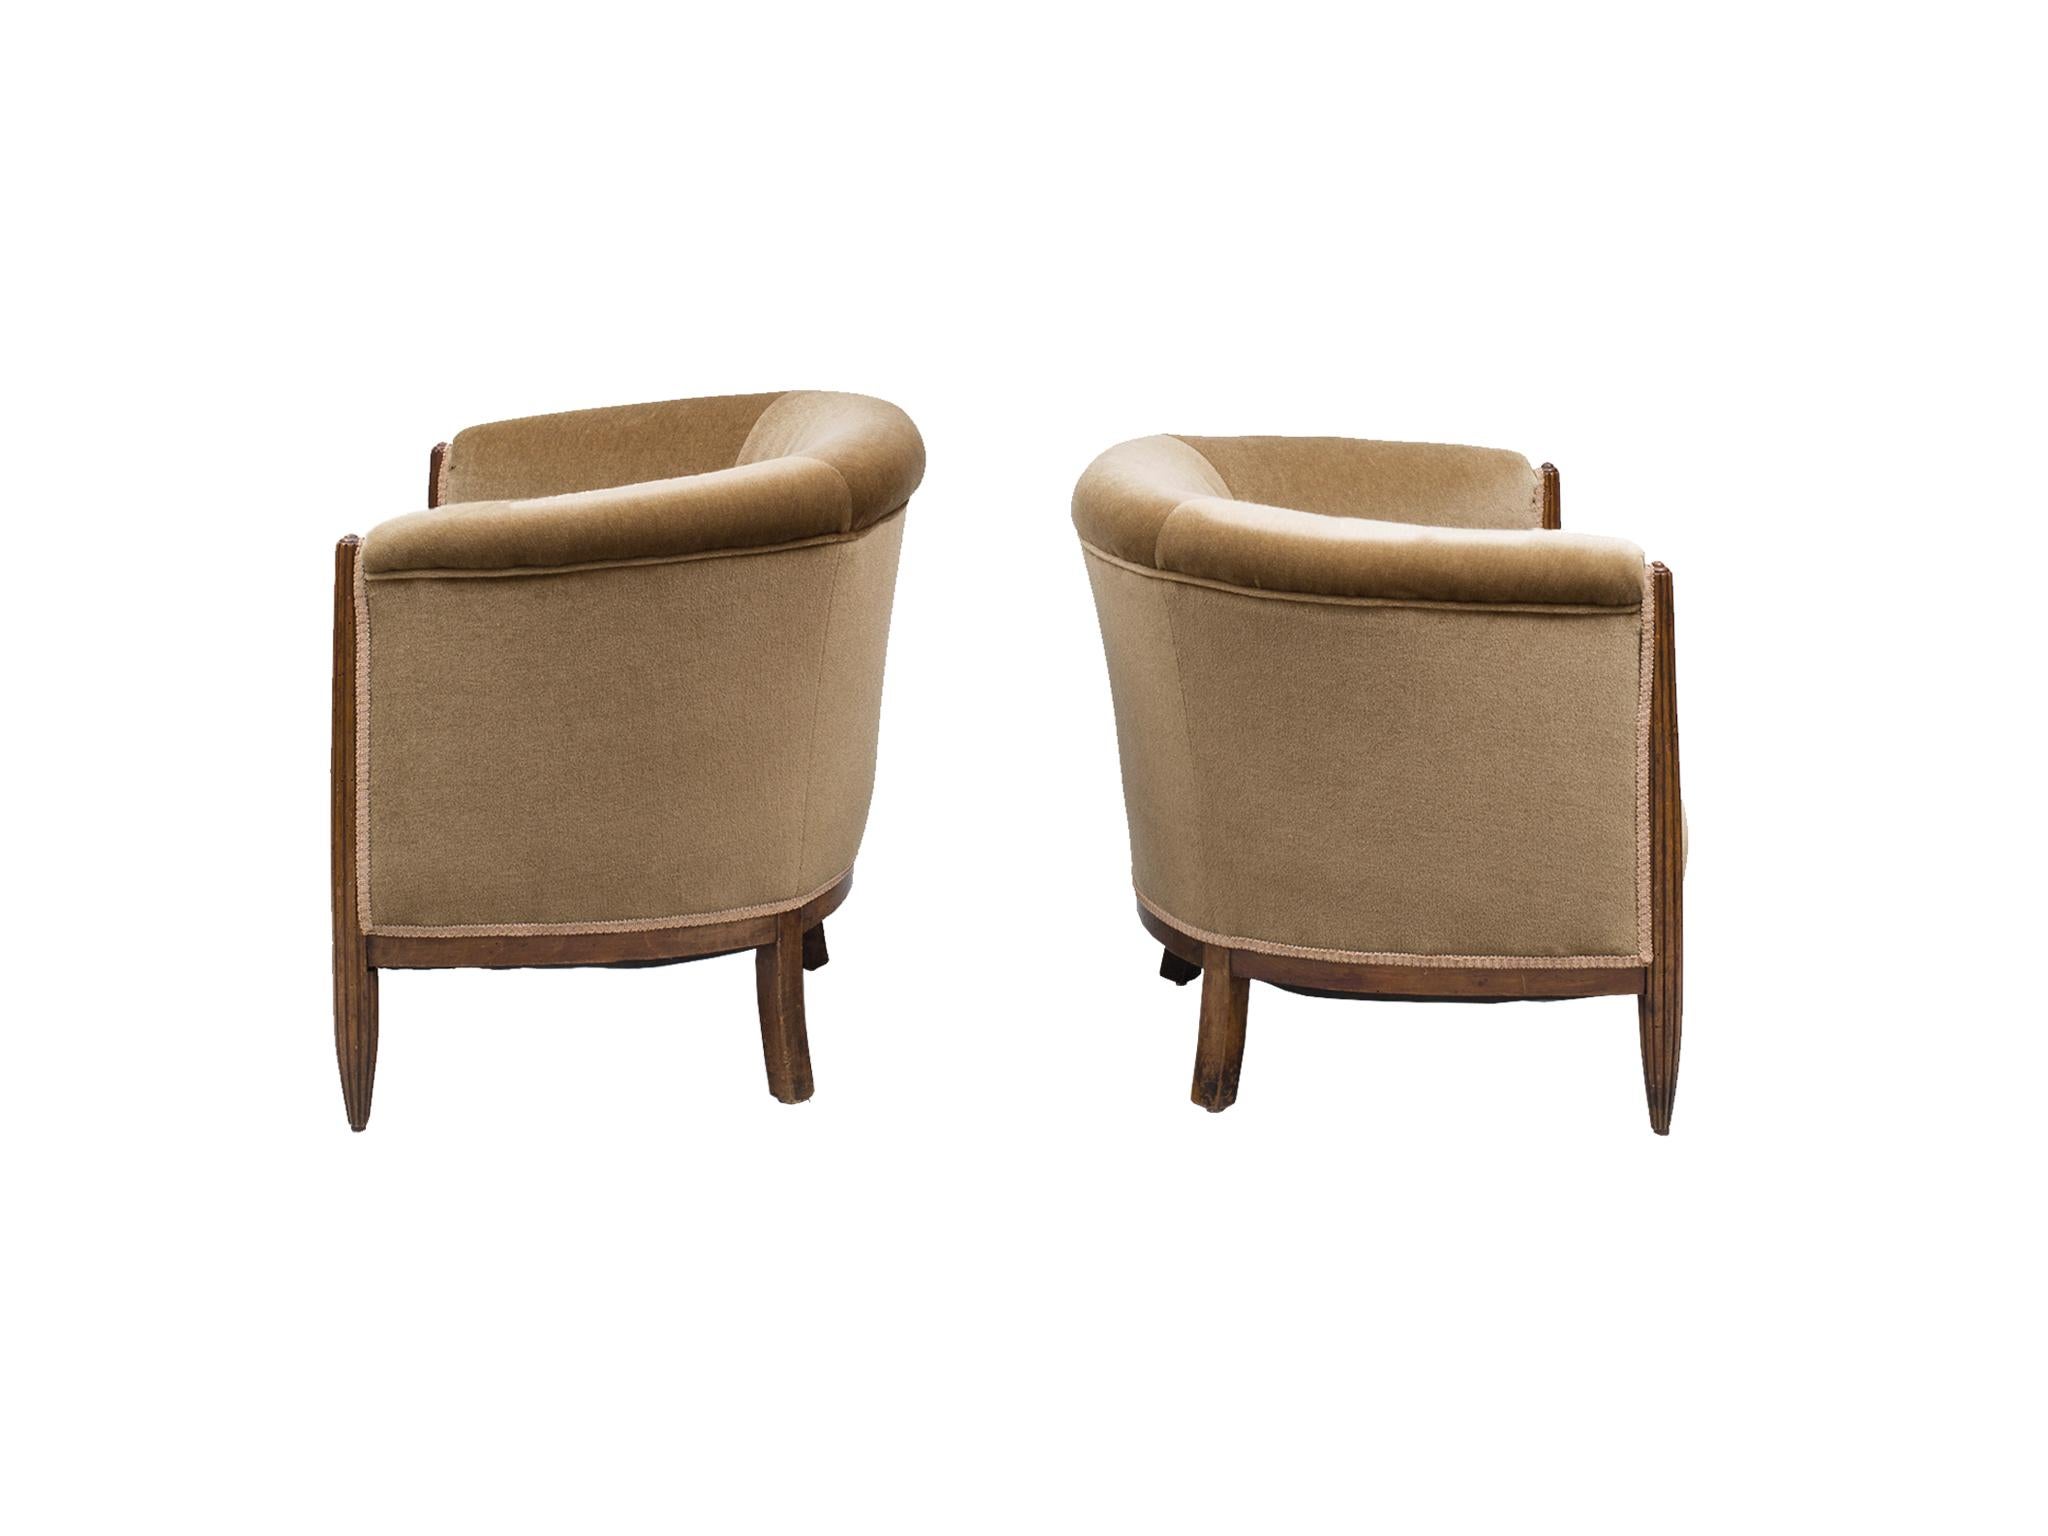 Two elegant Art Deco club chairs that are a near-pair. They were crafted in the 1930s, comprising of mahogany wood frame and legs. The fabric is a later re-upholstery work: a lovely mohair in a champagne-taupe hue. The front legs are fluted, while